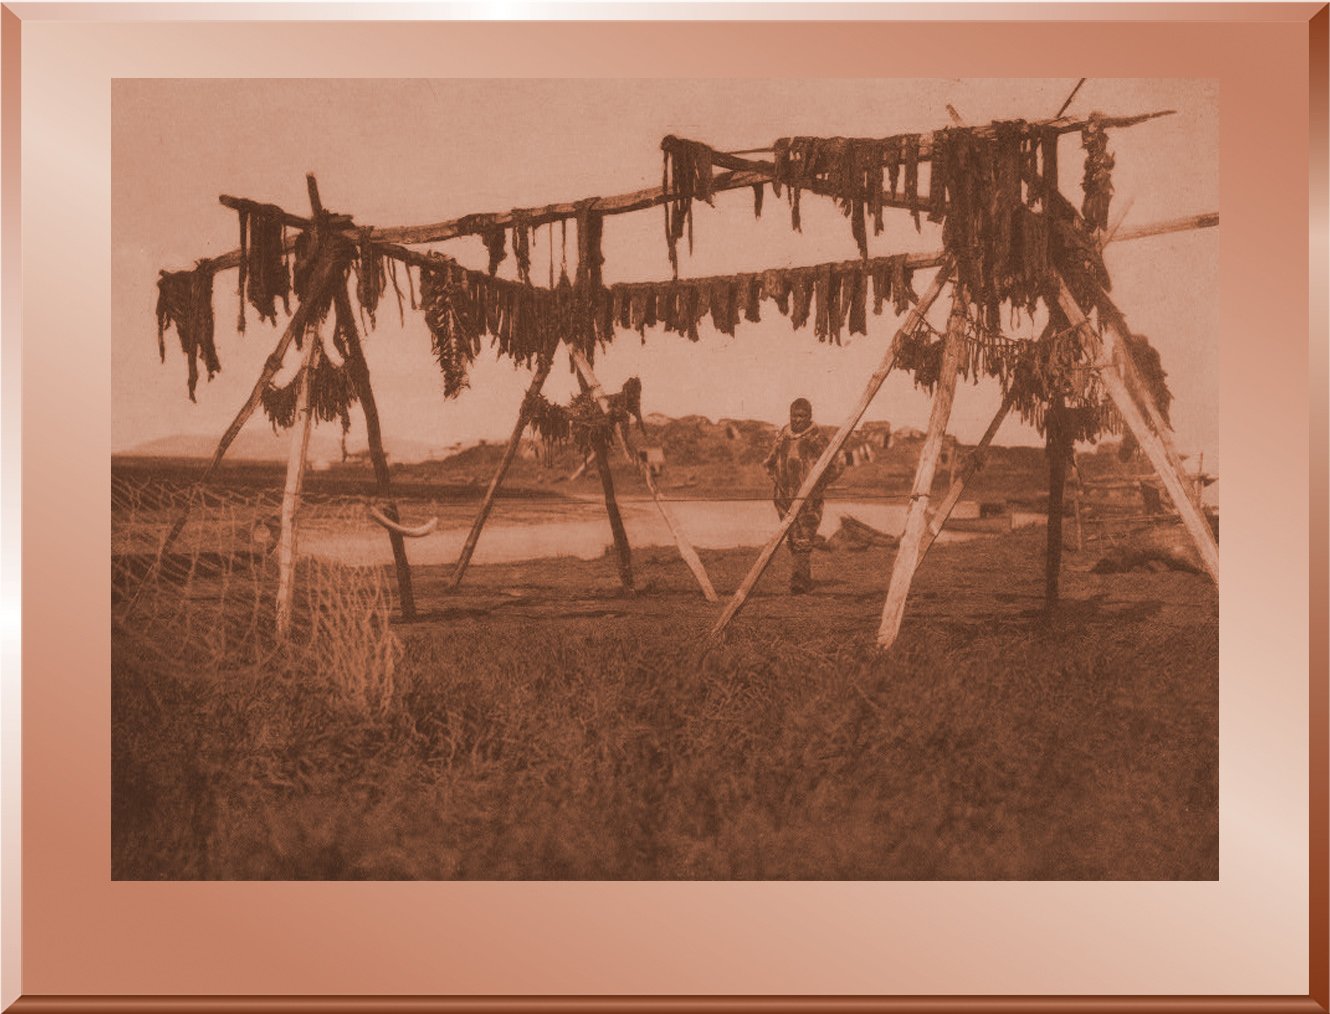 Drying Whale Meat - Hooper Bay